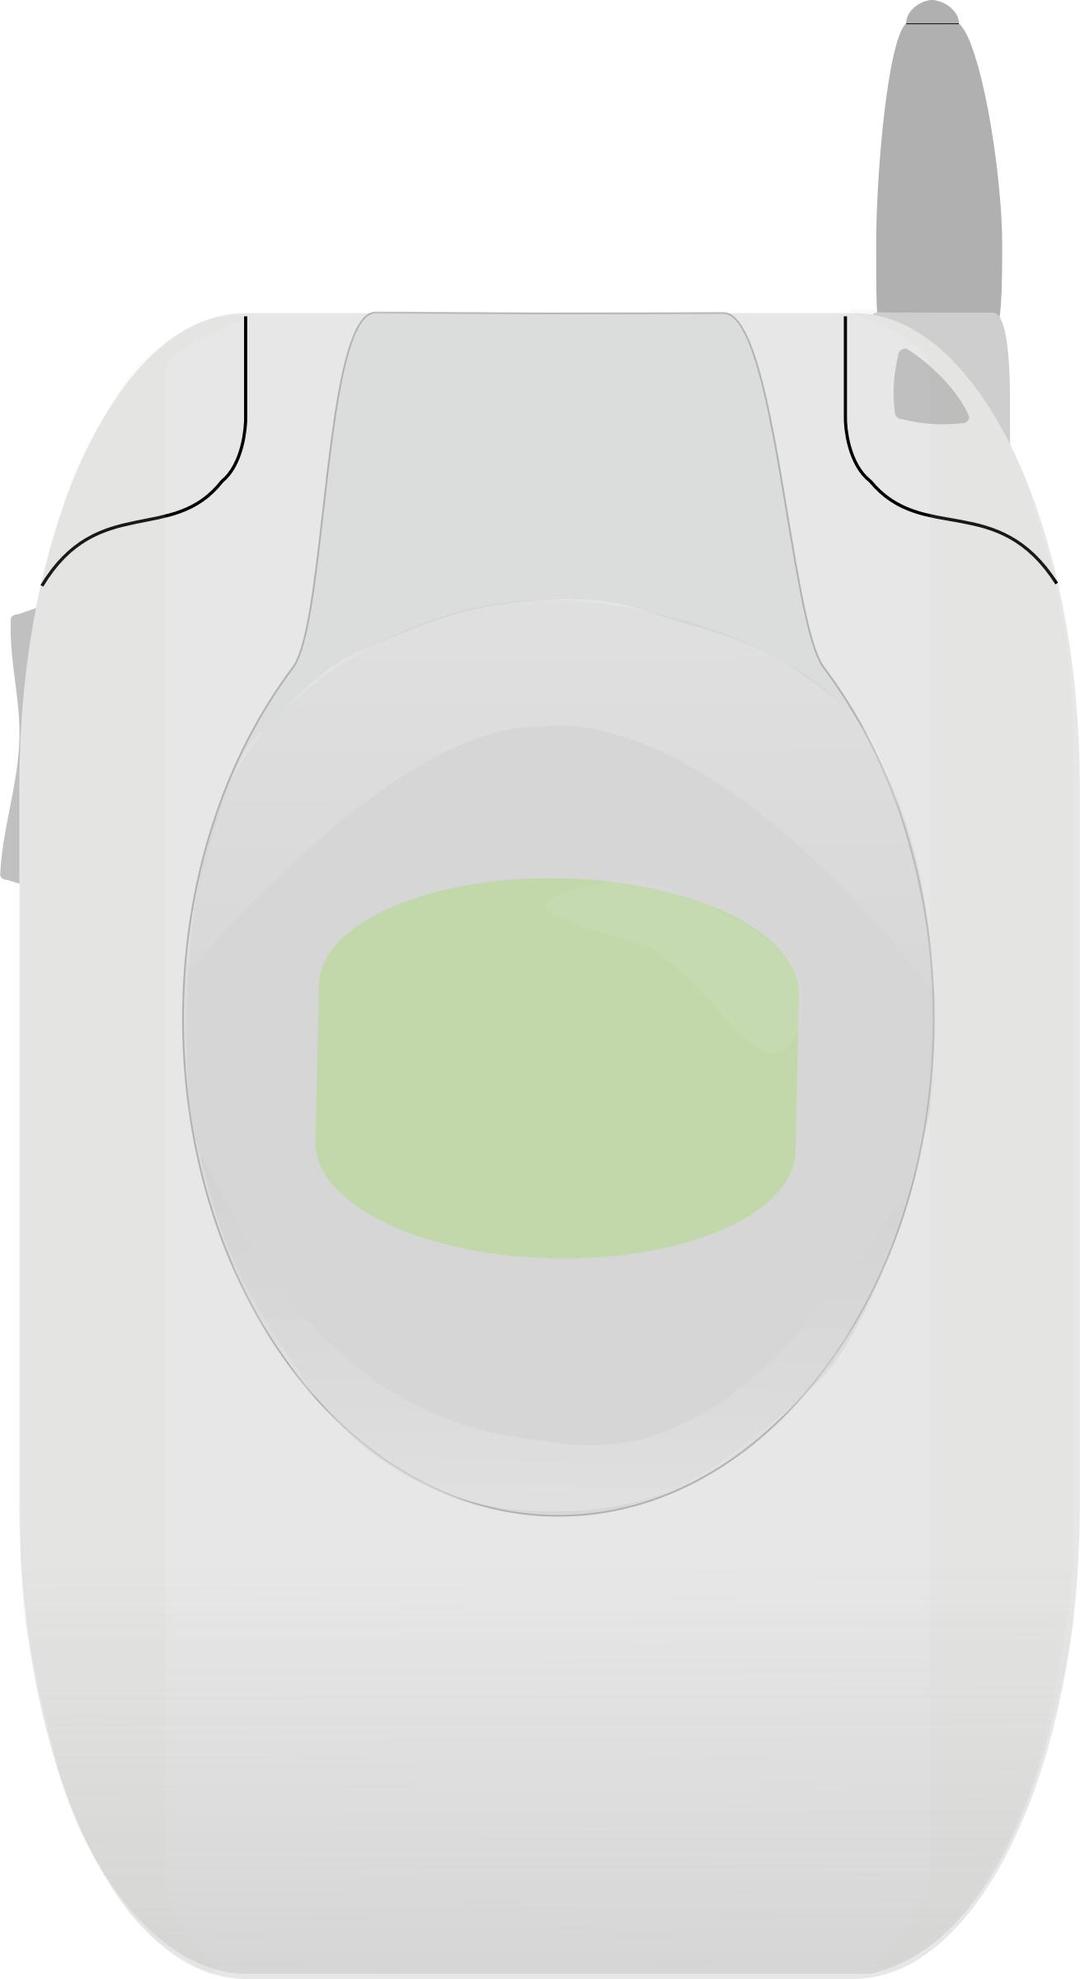 sprint cell phone png transparent